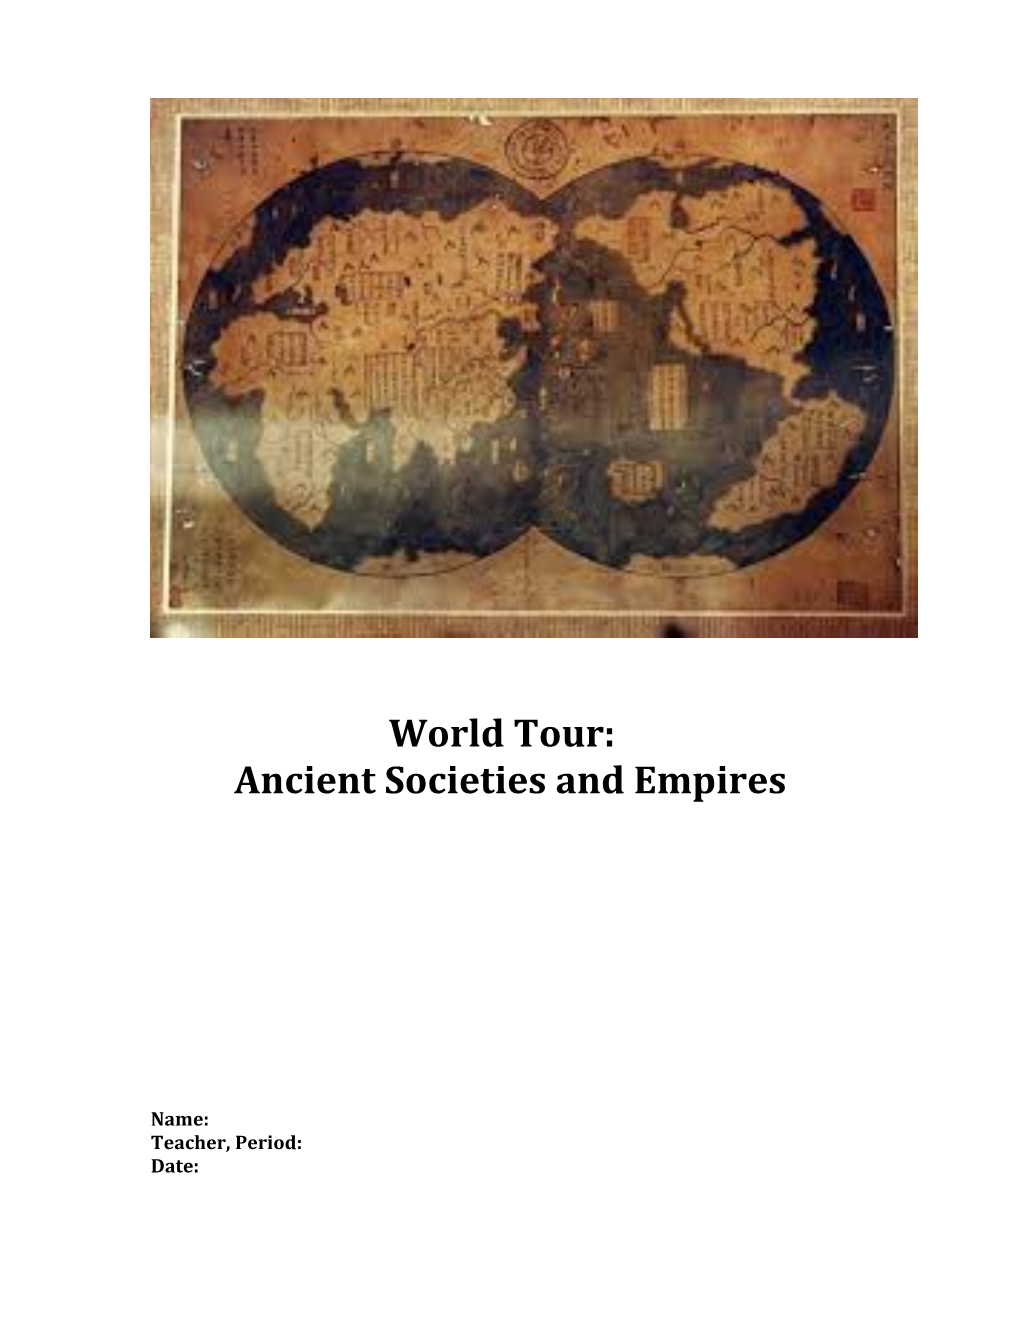 Ancient Societies and Empires